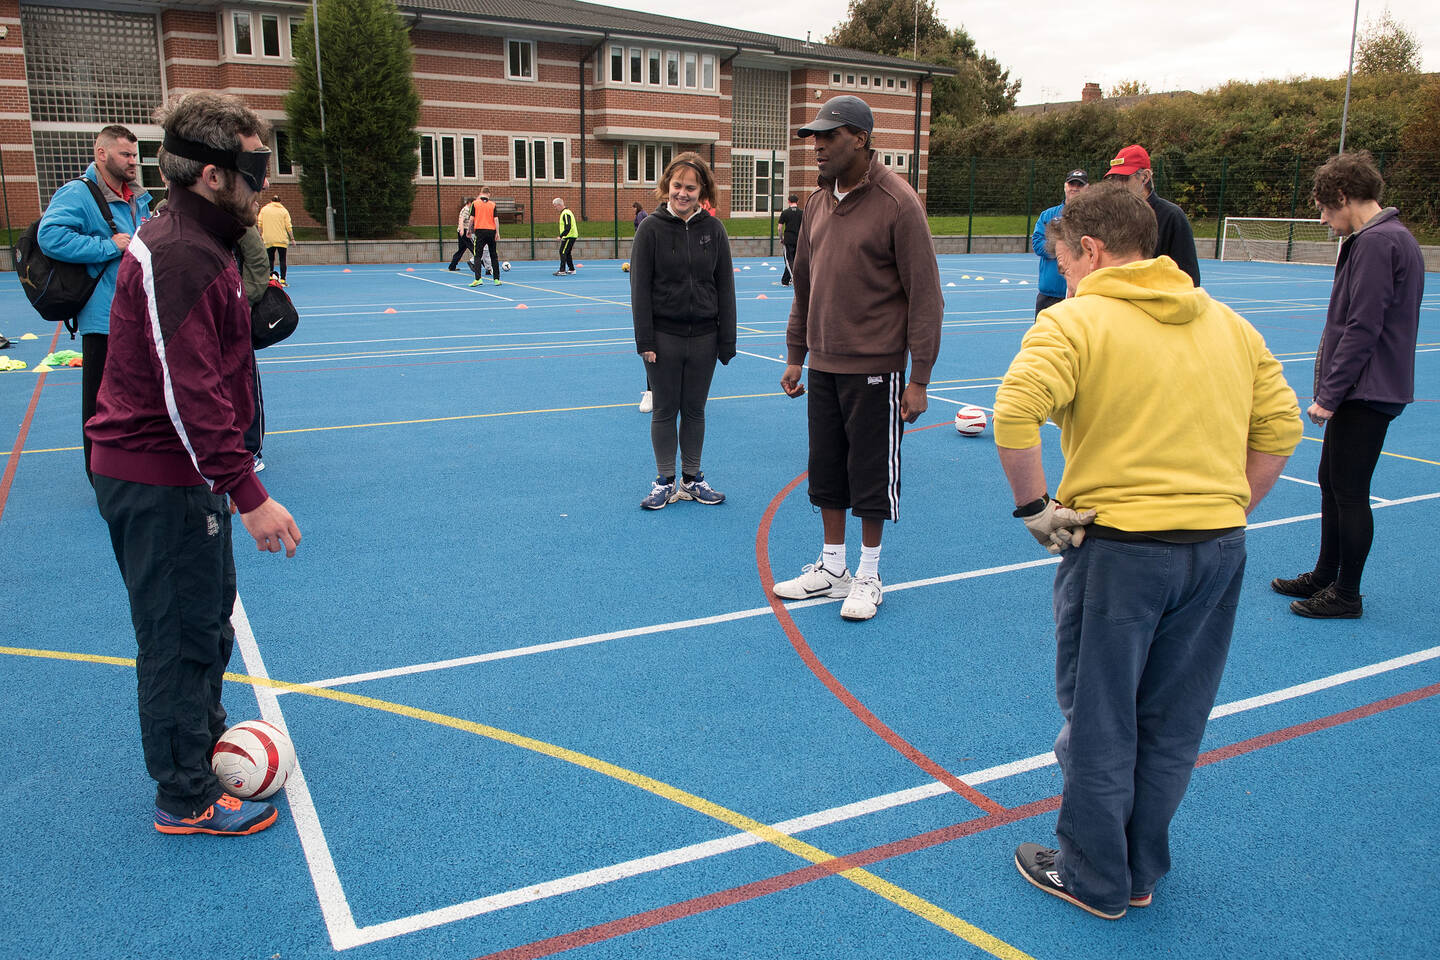 Players taking part in a British Blind Sport football session